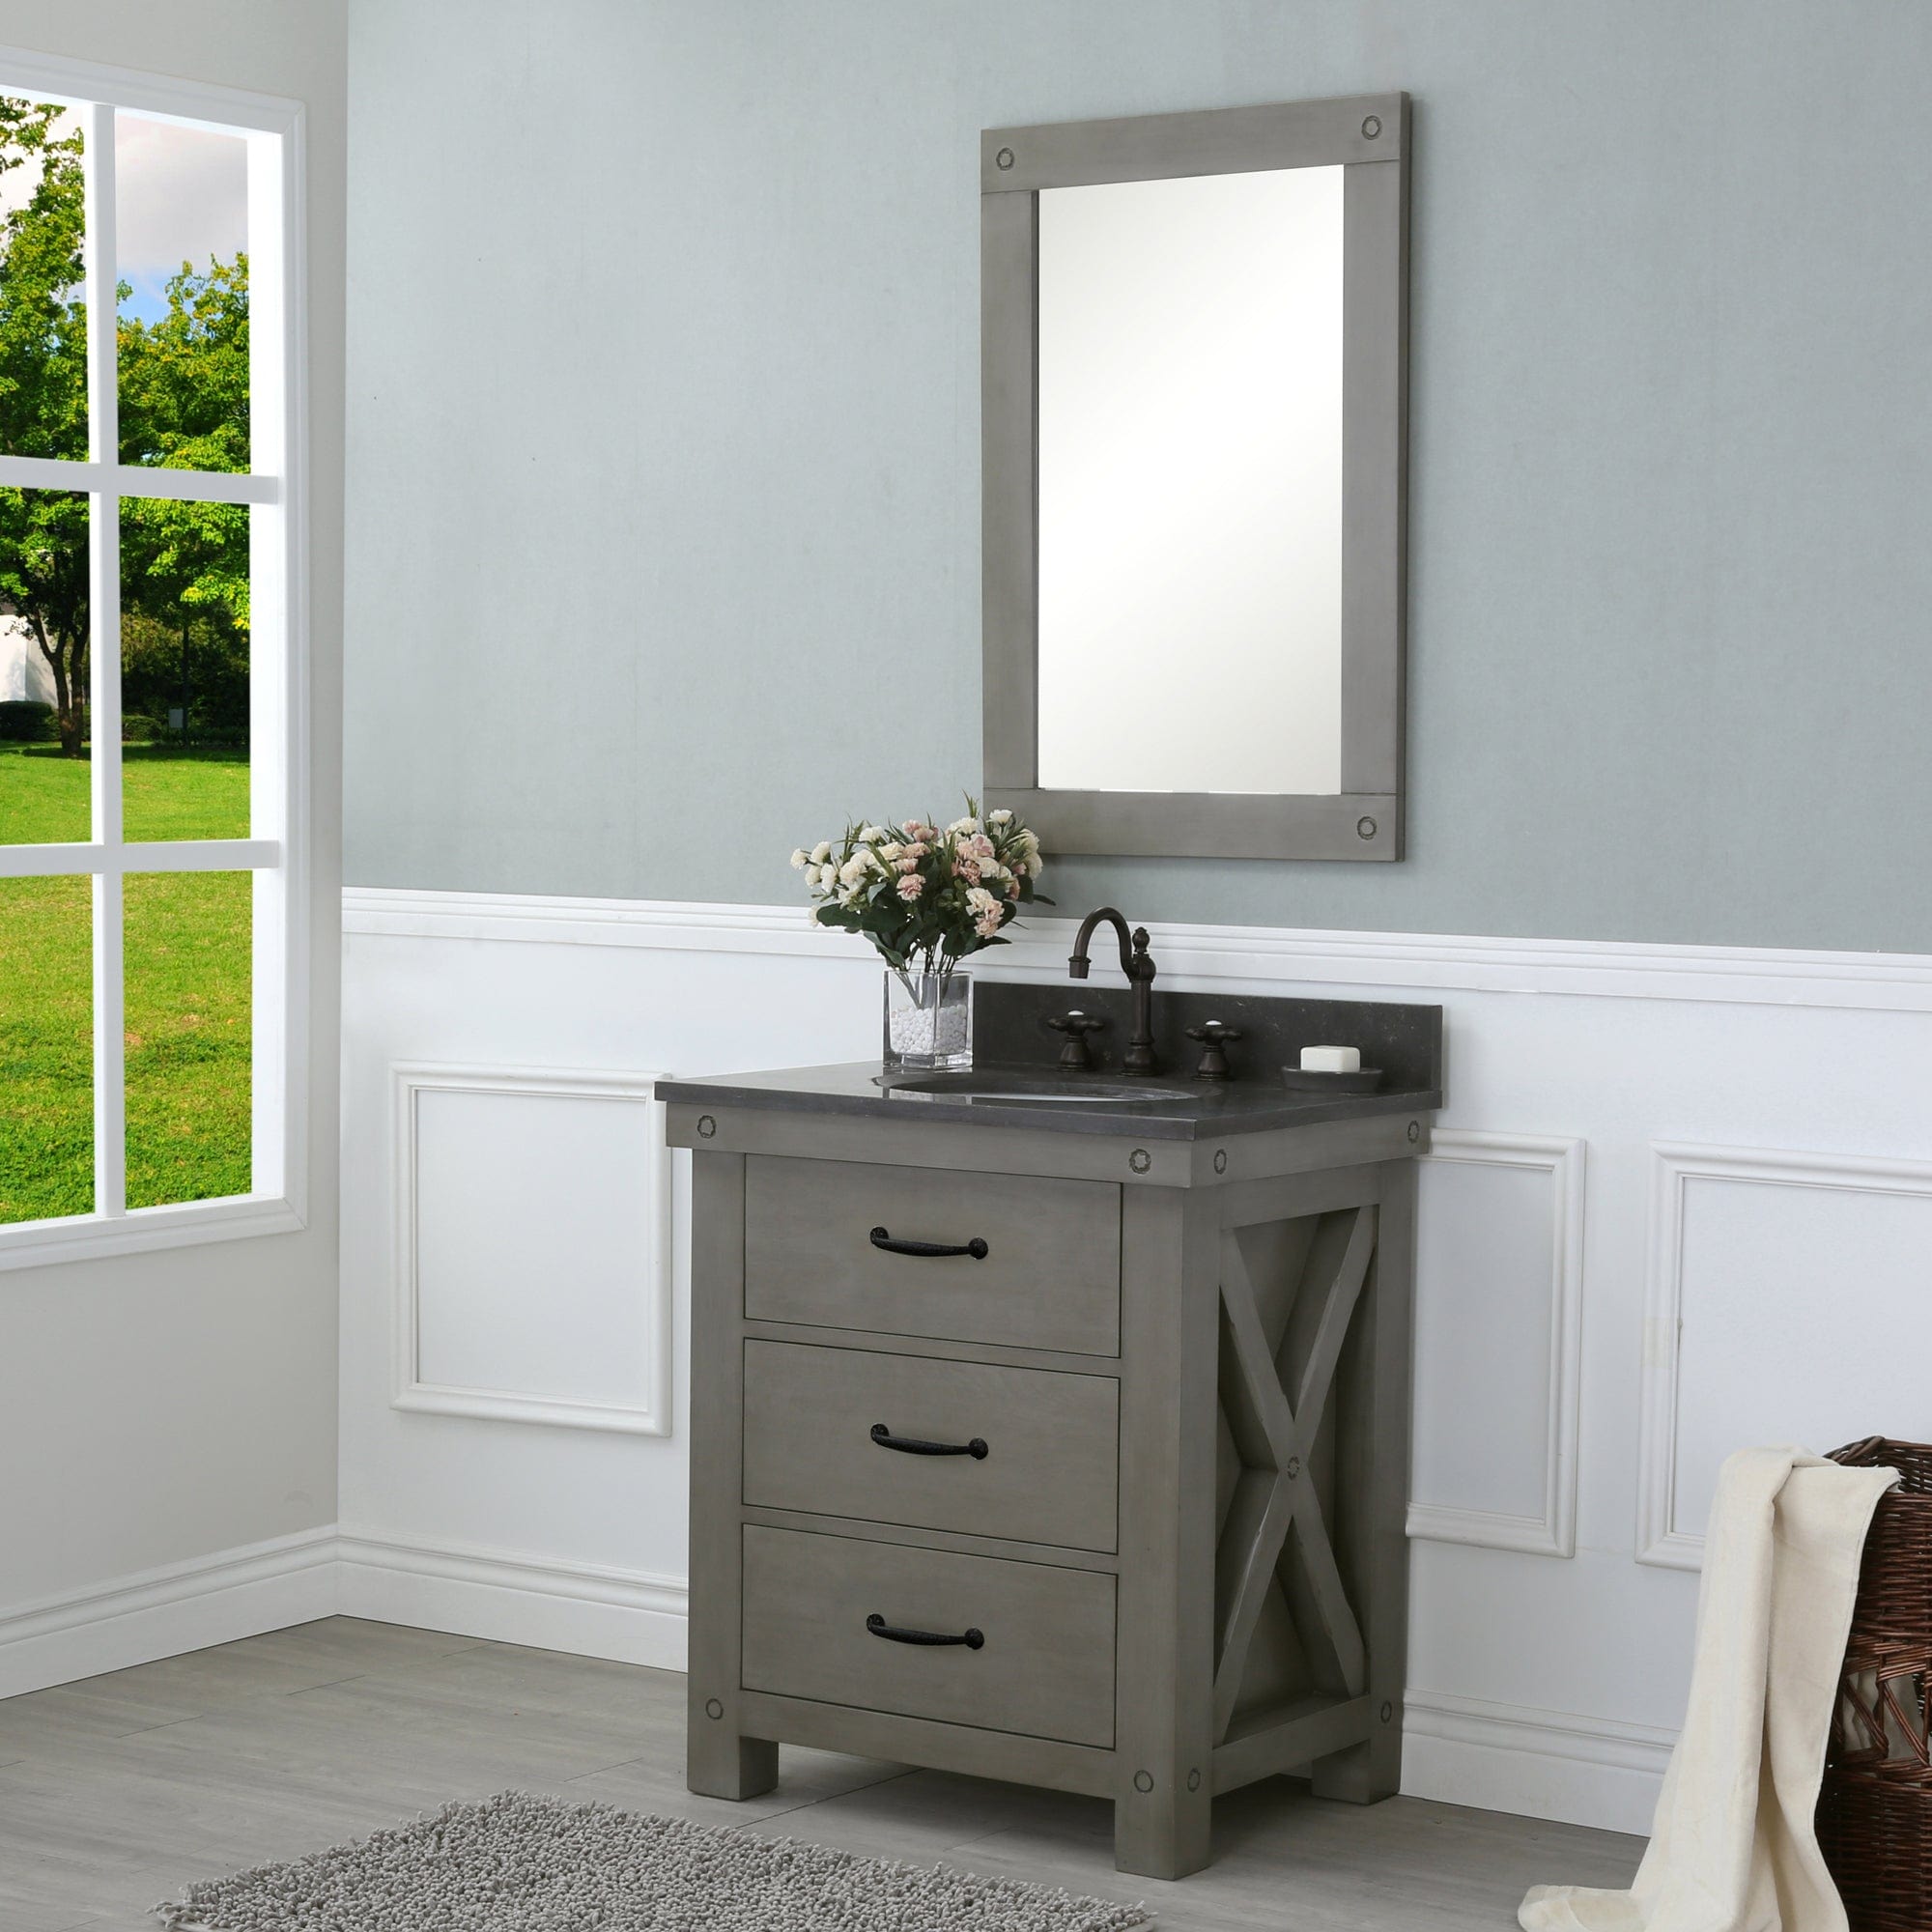 30 Inch Grizzle Grey Single Sink Bathroom Vanity With Faucet With Blue Limestone Counter Top From The ABERDEEN Collection - Molaix732030749610Bathroom VanitiesAB30BL03GG-000BX1203